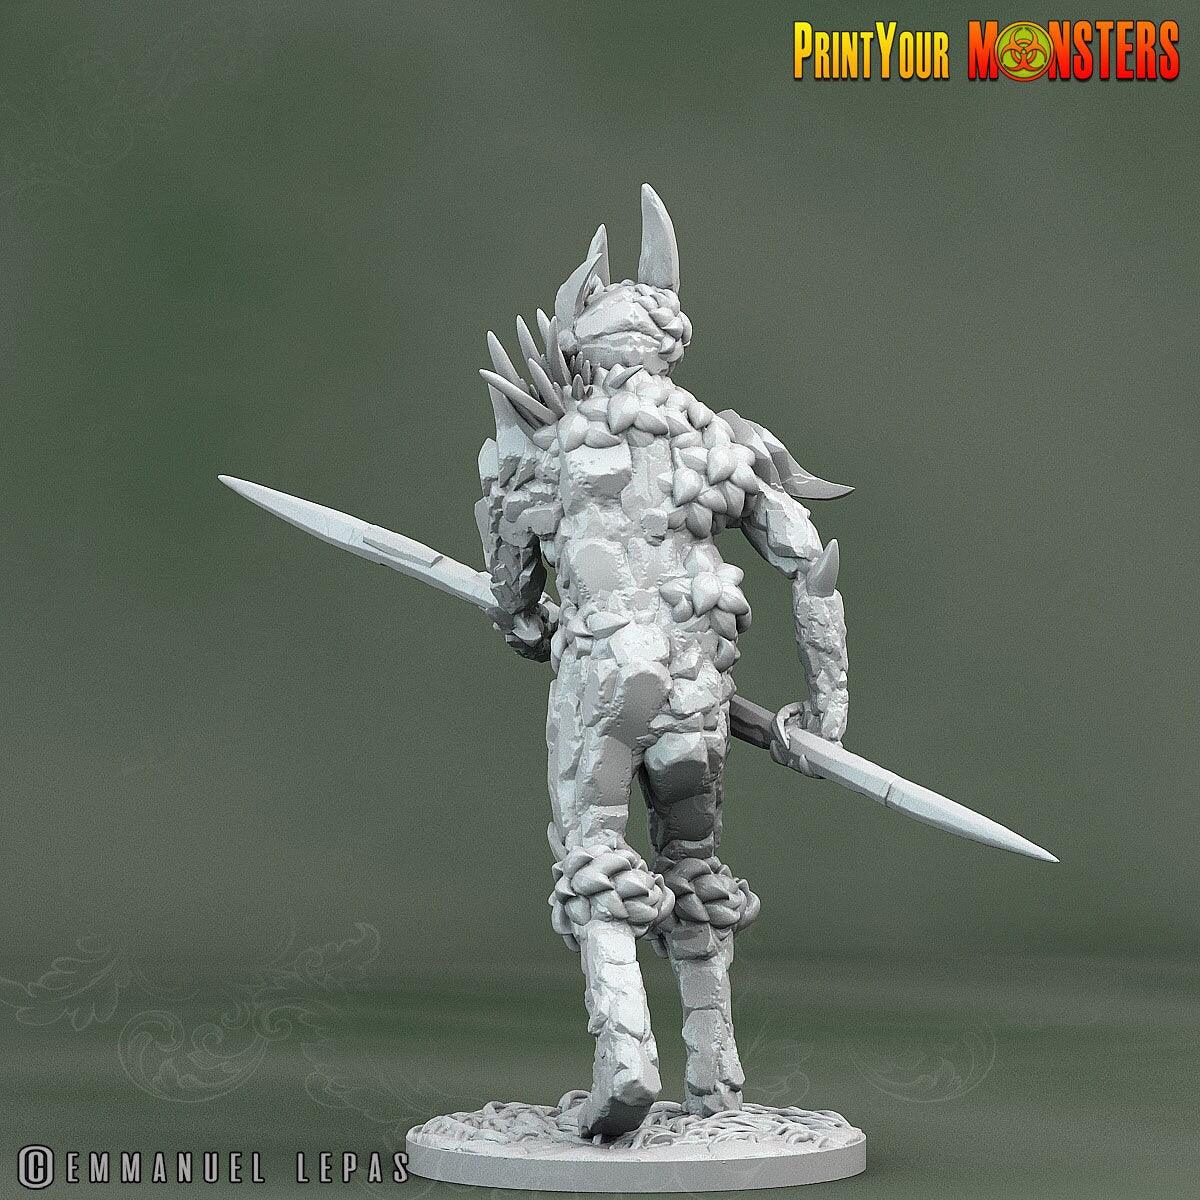 Rock Soldier with Lance Miniature | Print Your Monsters | Tabletop gaming | DnD Miniature | Dungeons and Dragons, DnD Warrior Fighter Monster - Plague Miniatures shop for DnD Miniatures